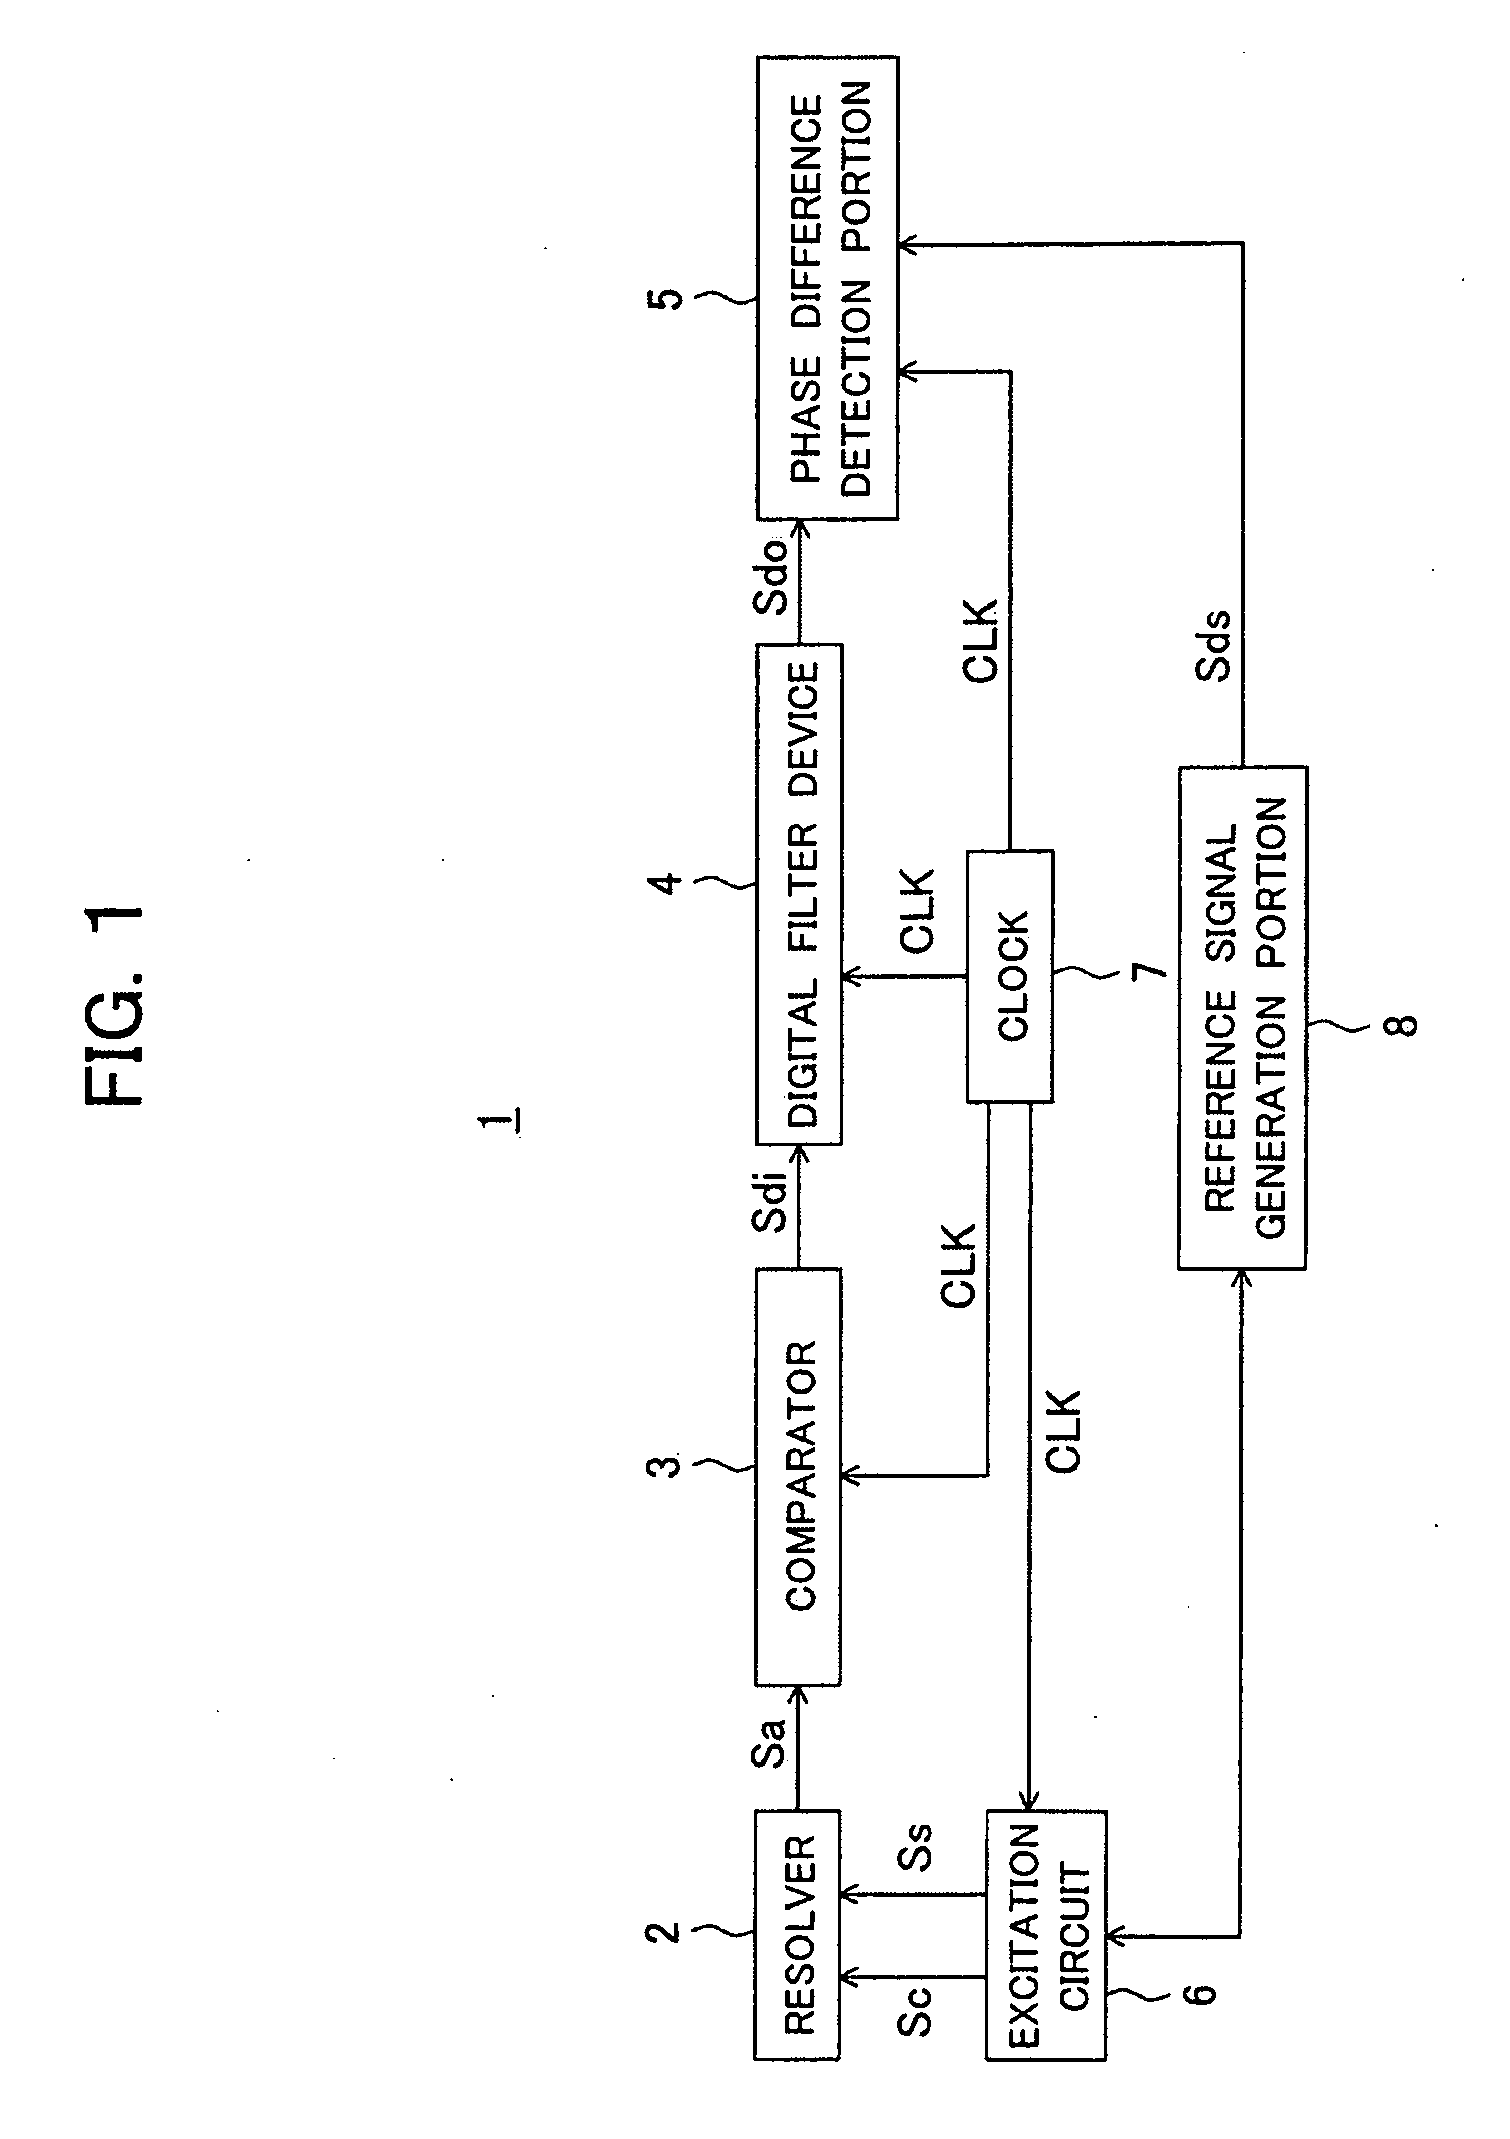 Digital filter device, phase detection device, position detection device, ad conversion device, zero cross detection device, and digital filter program